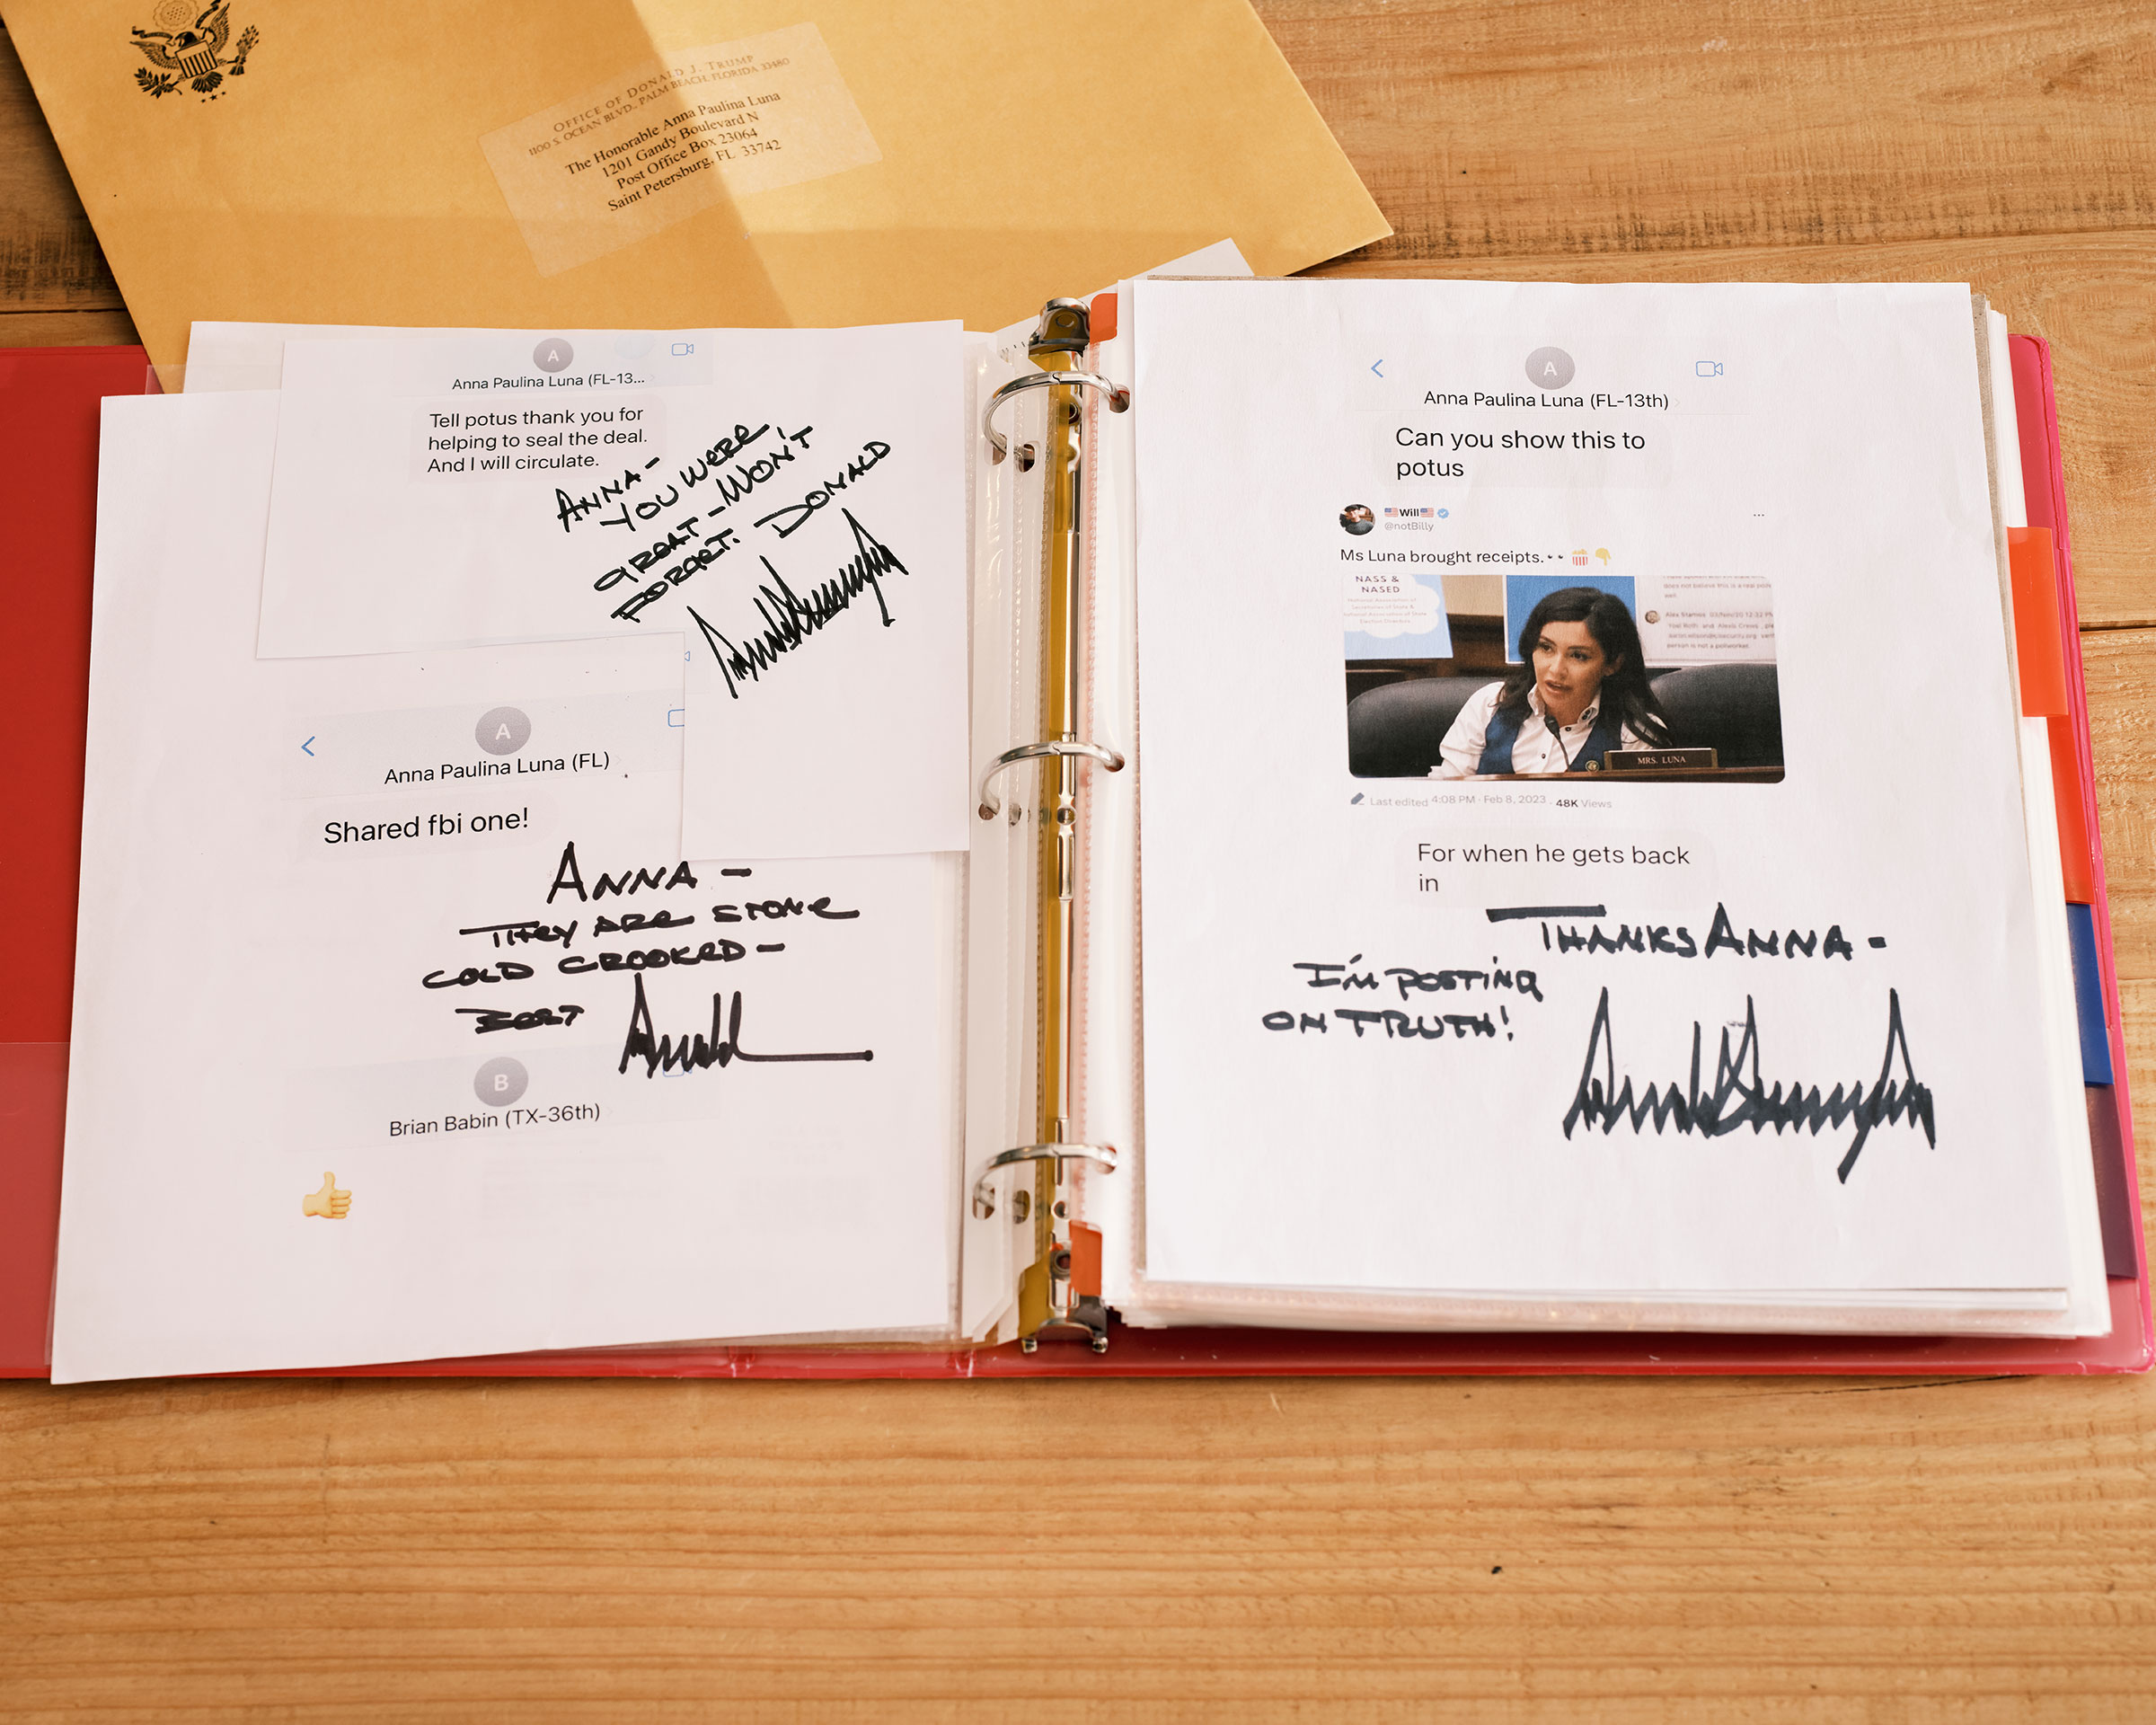 A binder full of handwritten messages and letters from President Donald Trump is seen at Luna’s home in Florida. (Zack Wittman for TIME)